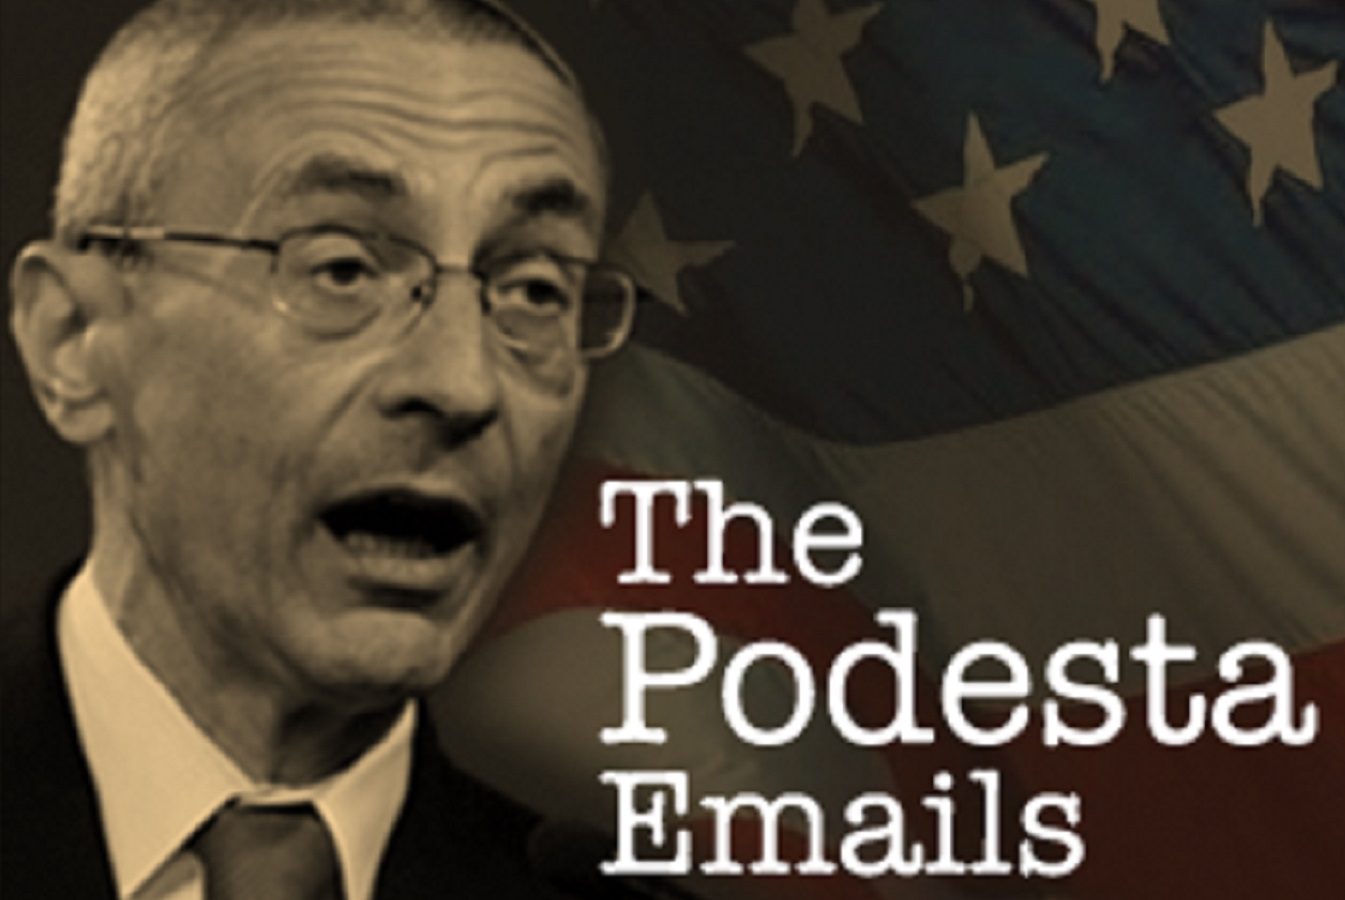 Dominion Advisor Met With John Podesta Offering 'Anything' That Would Help Defeat Trump, According to Email Released by WikiLeaks | The Gateway Pundit | by Cassandra MacDonald